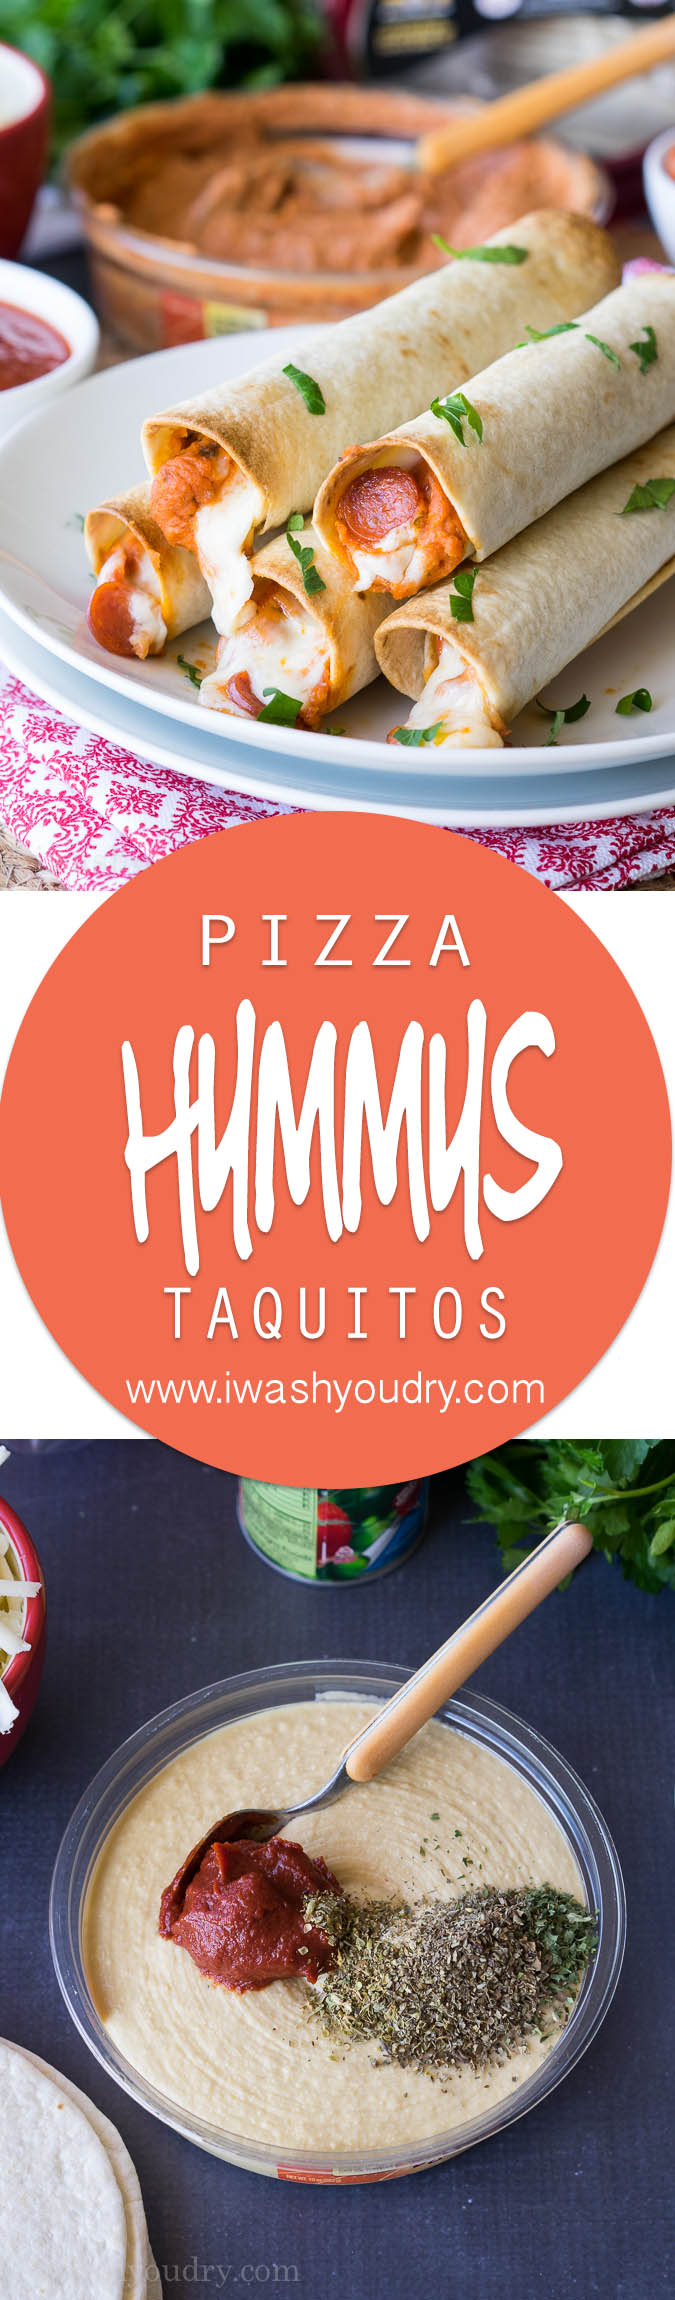 These Pizza Hummus Taquitos are a cheesy, crispy baked snack or appetizer that my kids go nuts for! They're so easy to make too!